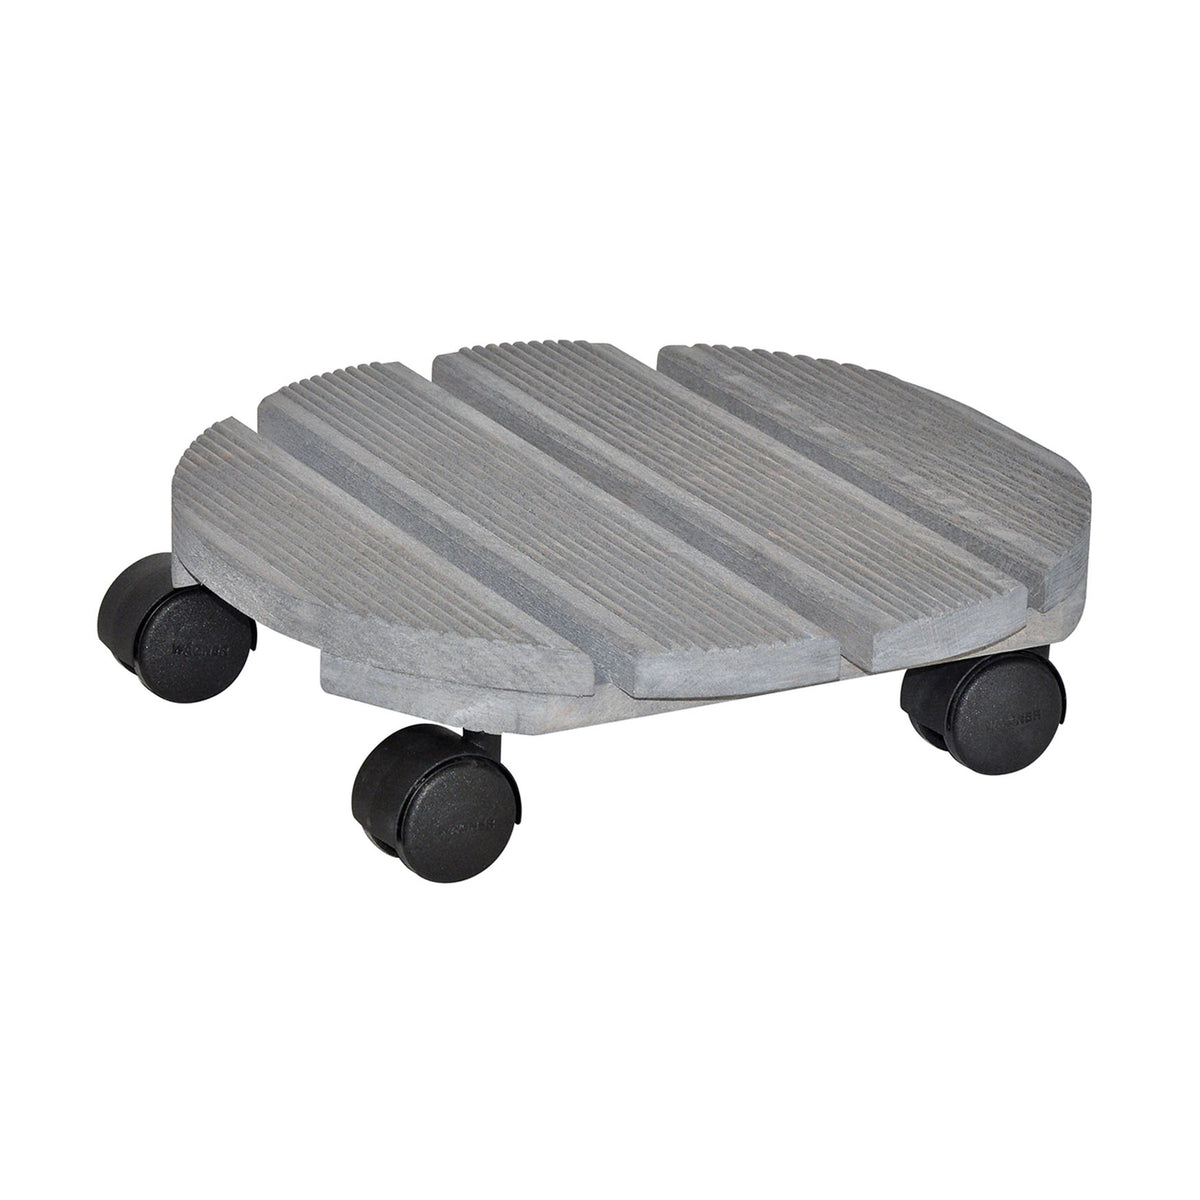 Gray round ribbed plant caddy. Made of beech wood. 220 lbs. capacity. 11.4&quot;D x 3.5&quot;H, 2.3 lbs.